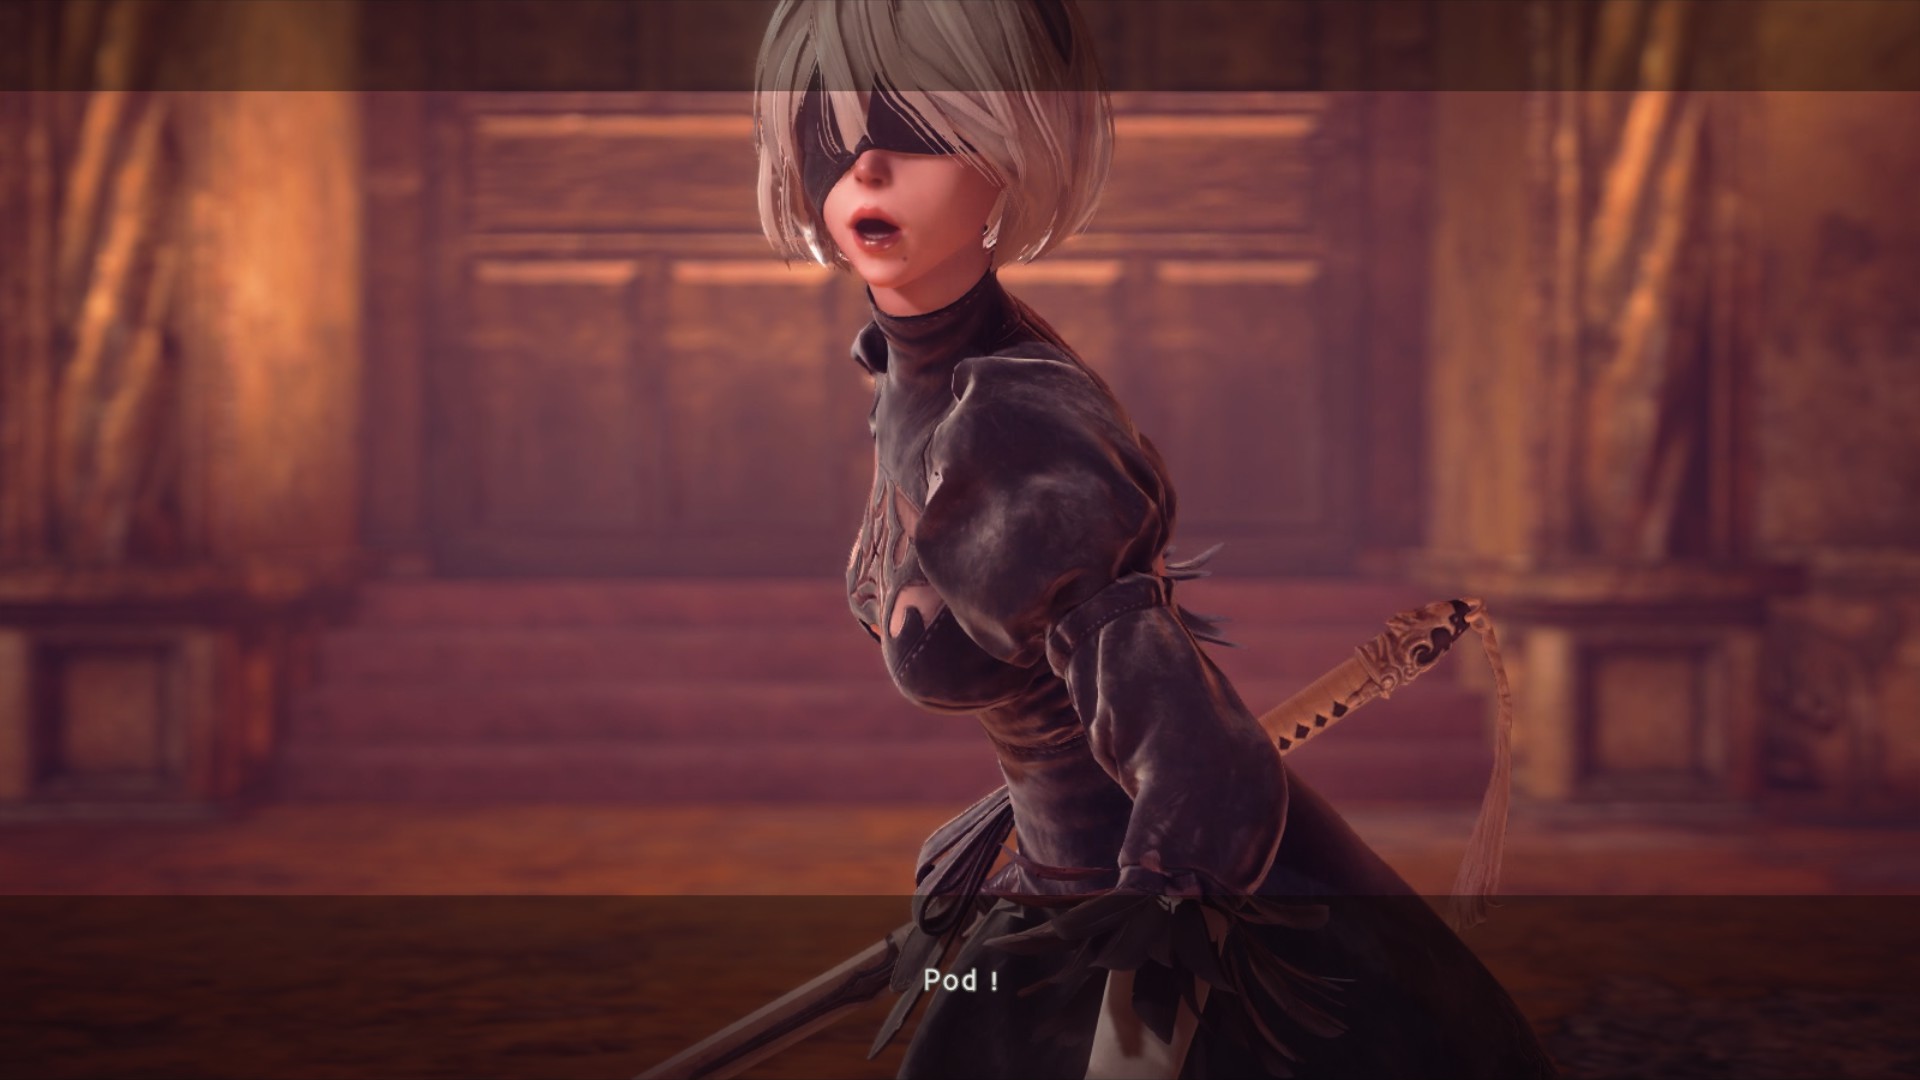 General 1920x1080 2B (Nier: Automata) Nier open mouth video games video game art blindfold video game girls